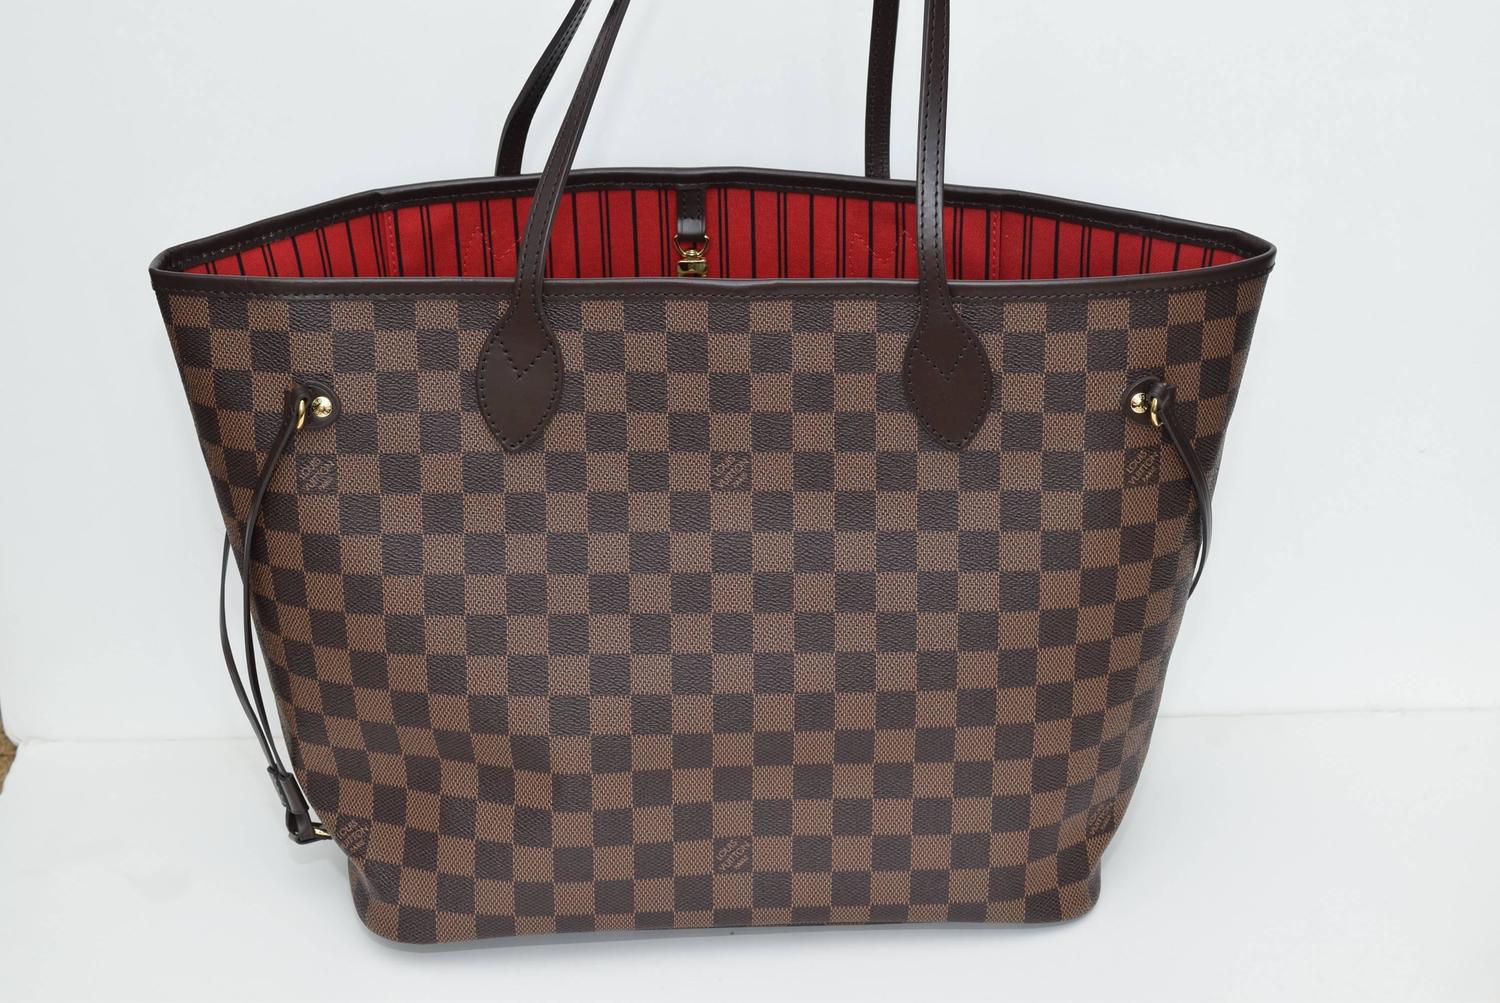 Where Is The Date Code On A Louis Vuitton Neverfull Bag | Confederated Tribes of the Umatilla ...